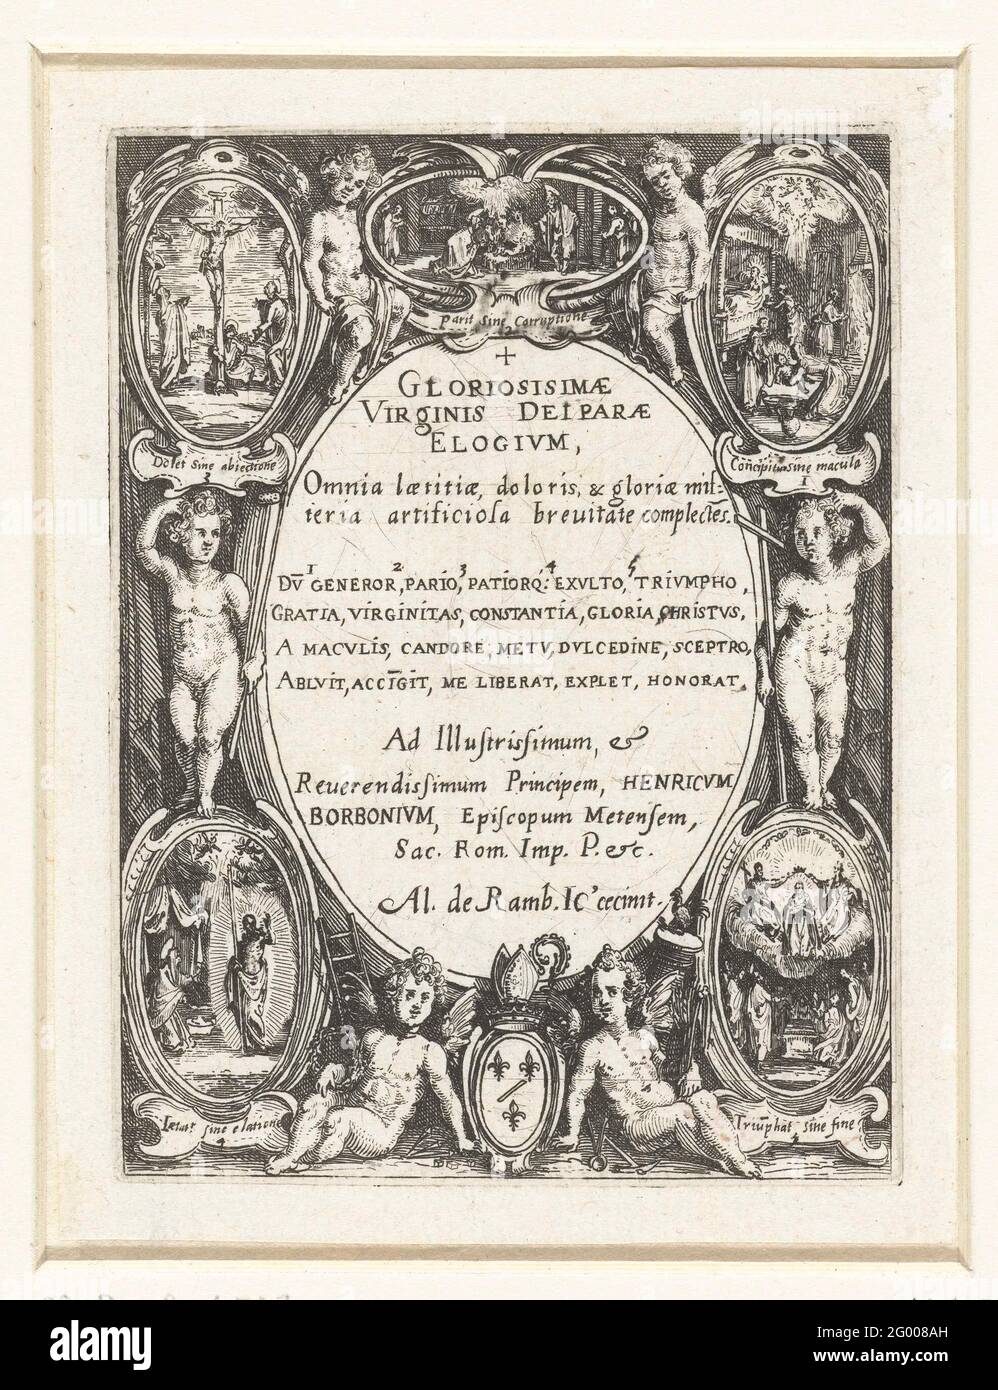 Cartouche with text surrounded by putti and scenes from the life of Mary; Gloriosisimae virginis dei parae elogium. Oval cartouche with Latin text, around which six putti, five medallions with scenes from the life of Mary and a coat of arms. The narrative scenes relate from the top right of the bottom right (counterclockwise): Birth of Maria, birth of Christ, Crucifixion, Christ appears after his death to Mary, Ascension and Coronation of Mary. Stock Photo